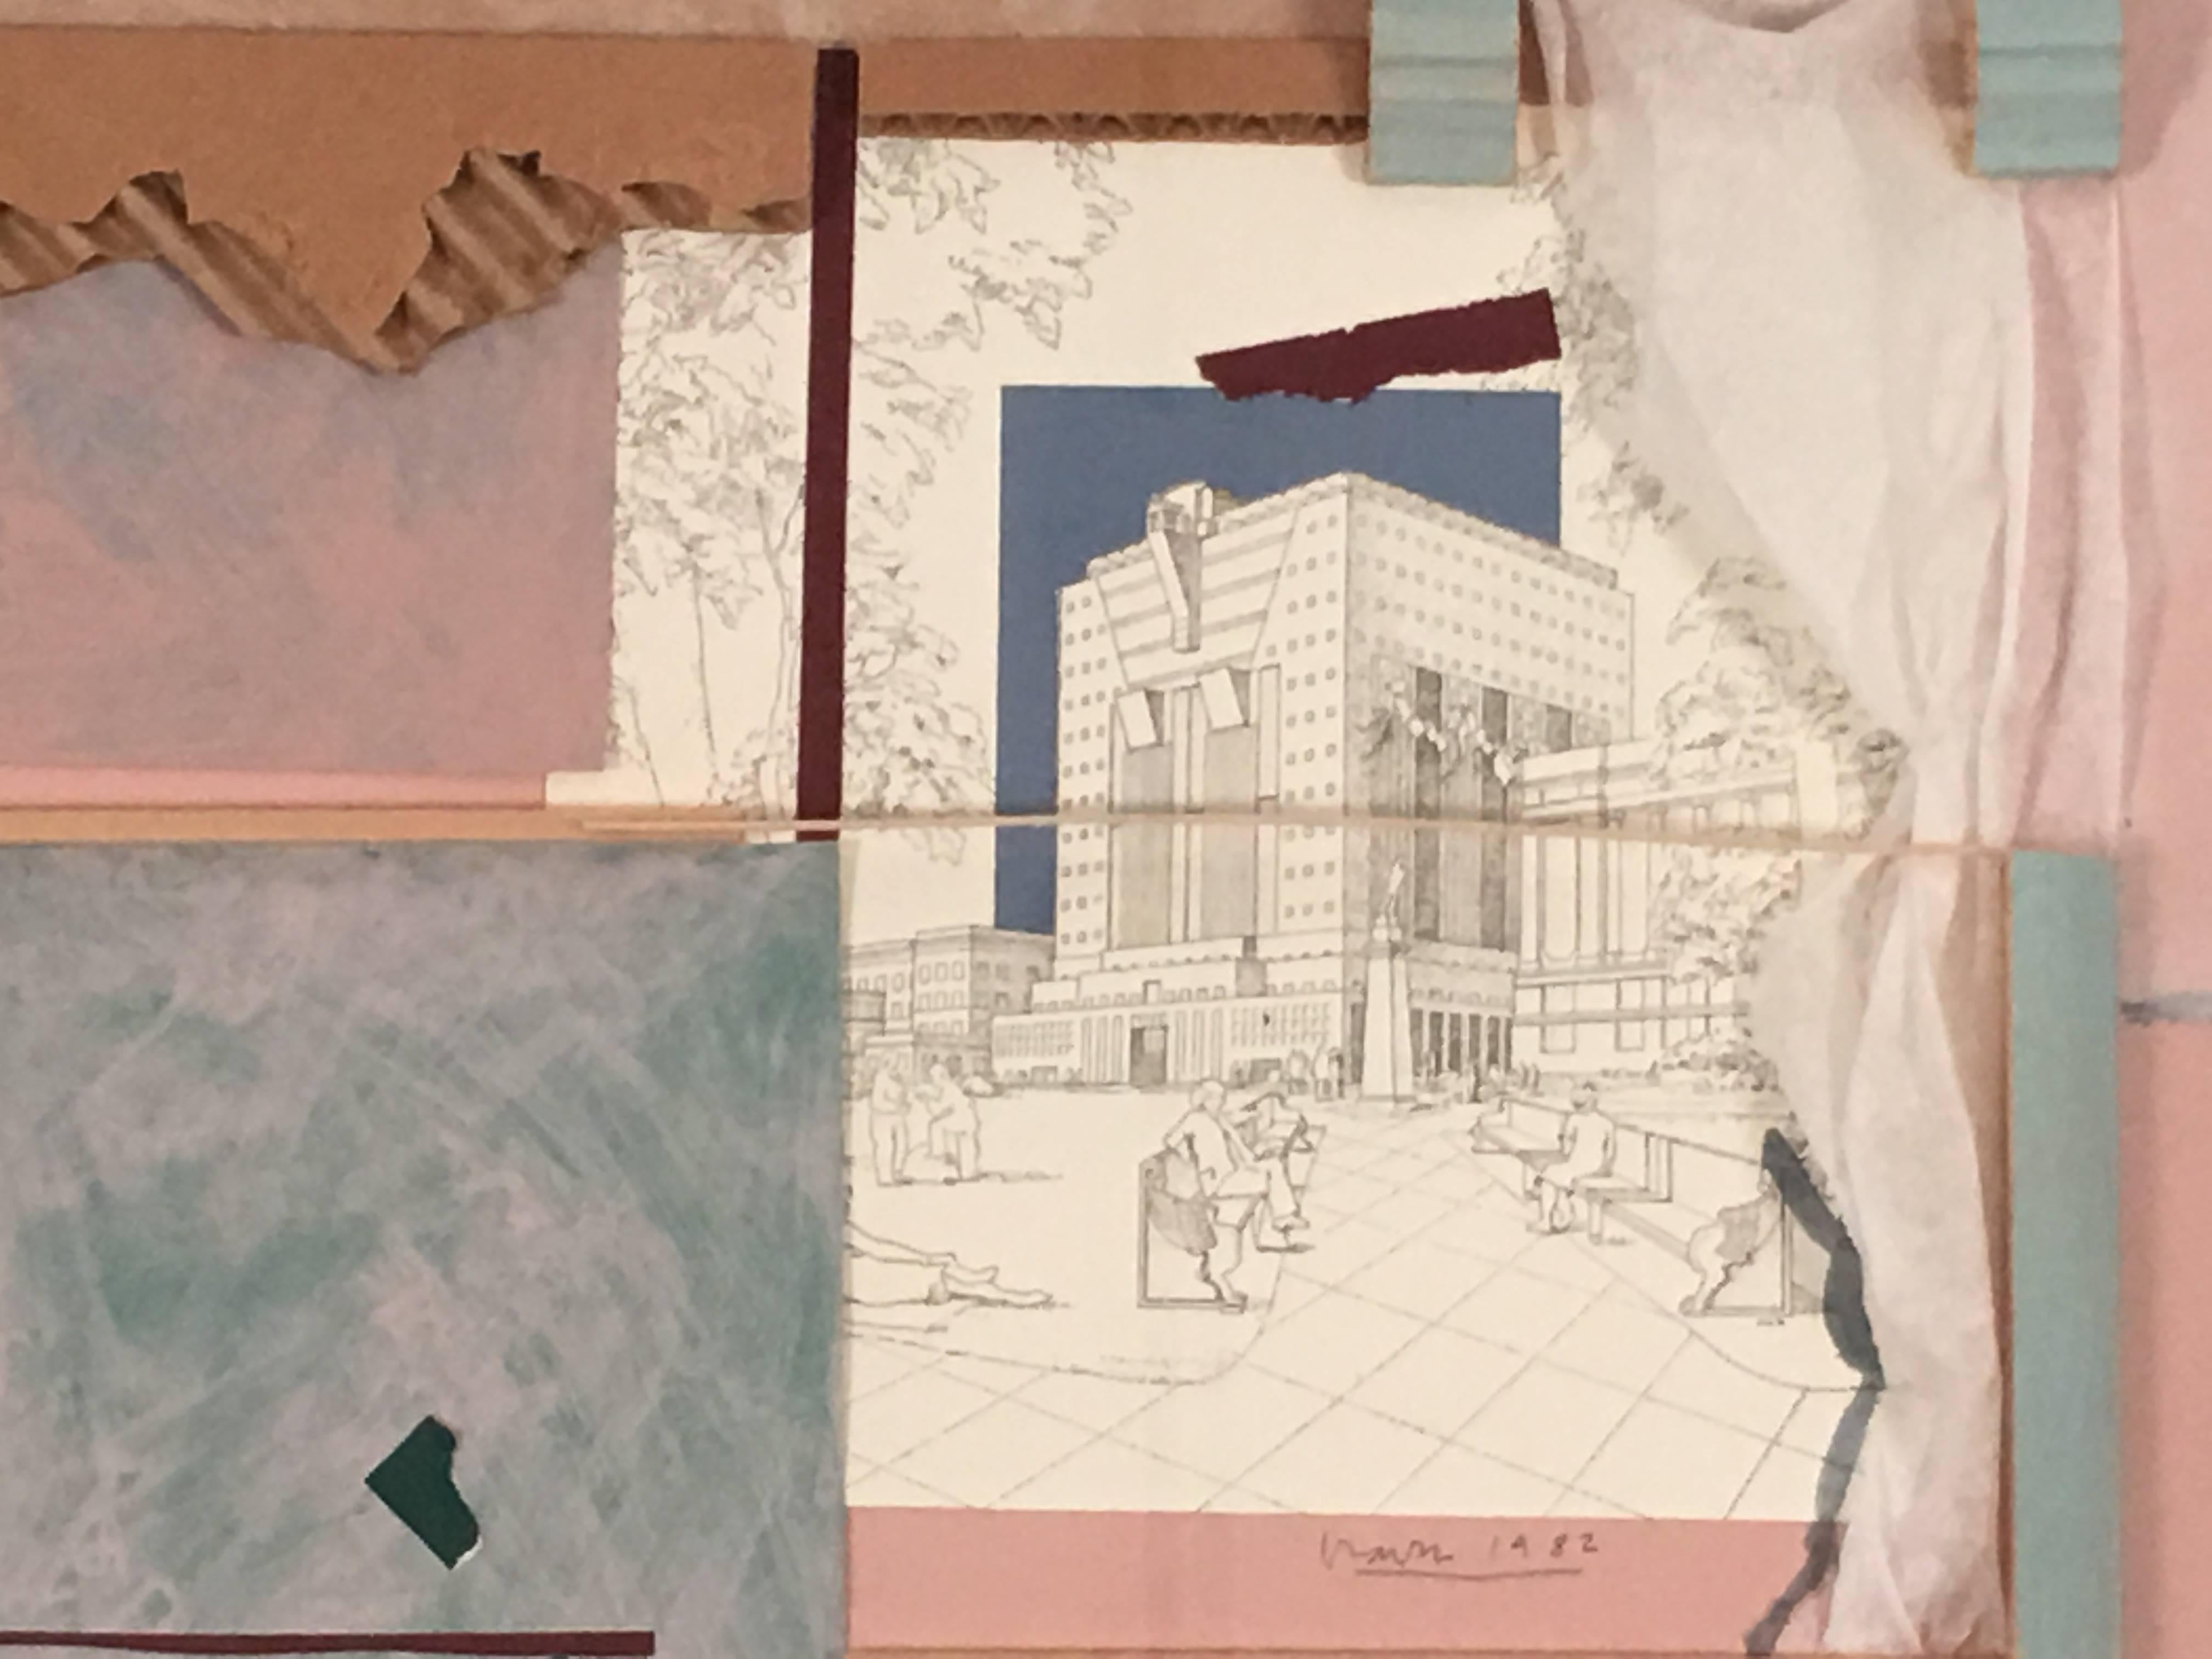 An iconic collage made by the architect Michael Graves in honor of the October 2, 1982 dedication of The Portland Building in Portland, Oregon (a landmark building considered the first major built work of Postmodernist architecture, which he